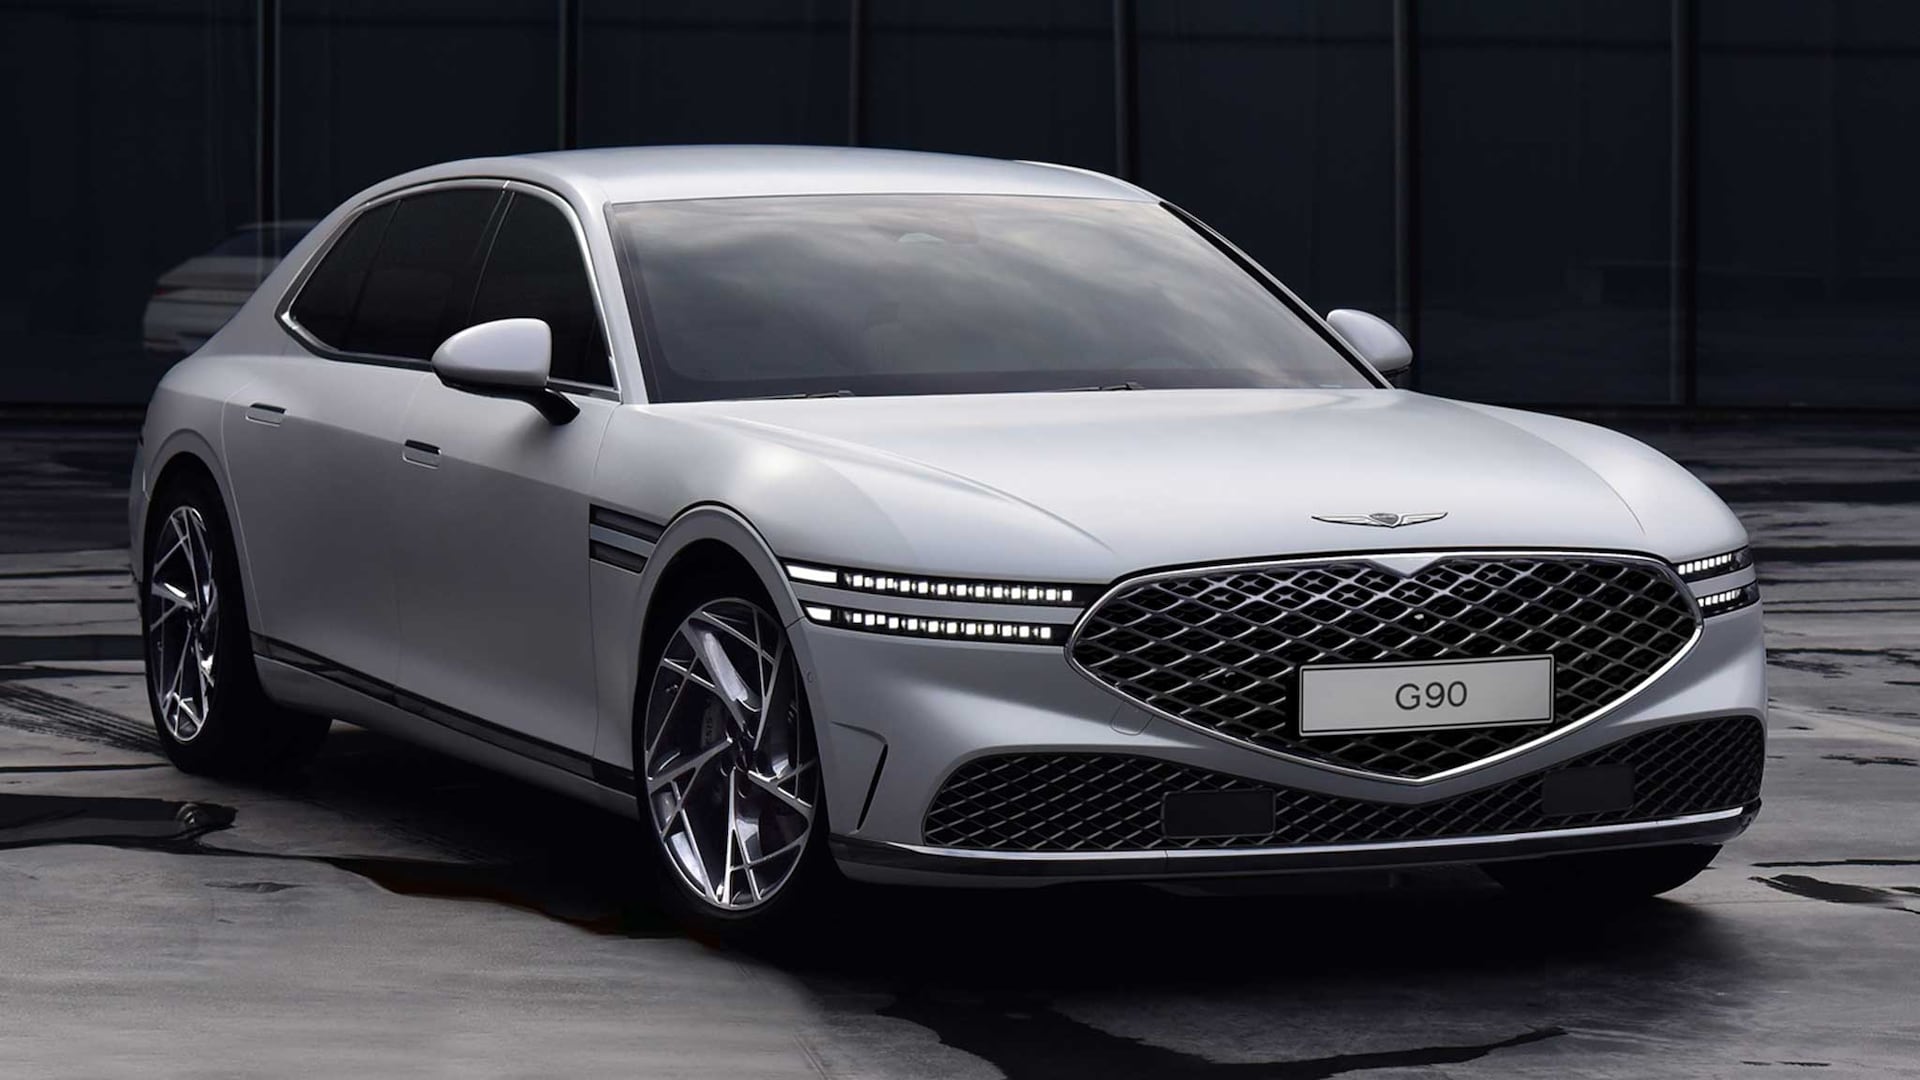 2023 Genesis G90 First Images: An Unapologetically Luxurious Sedan